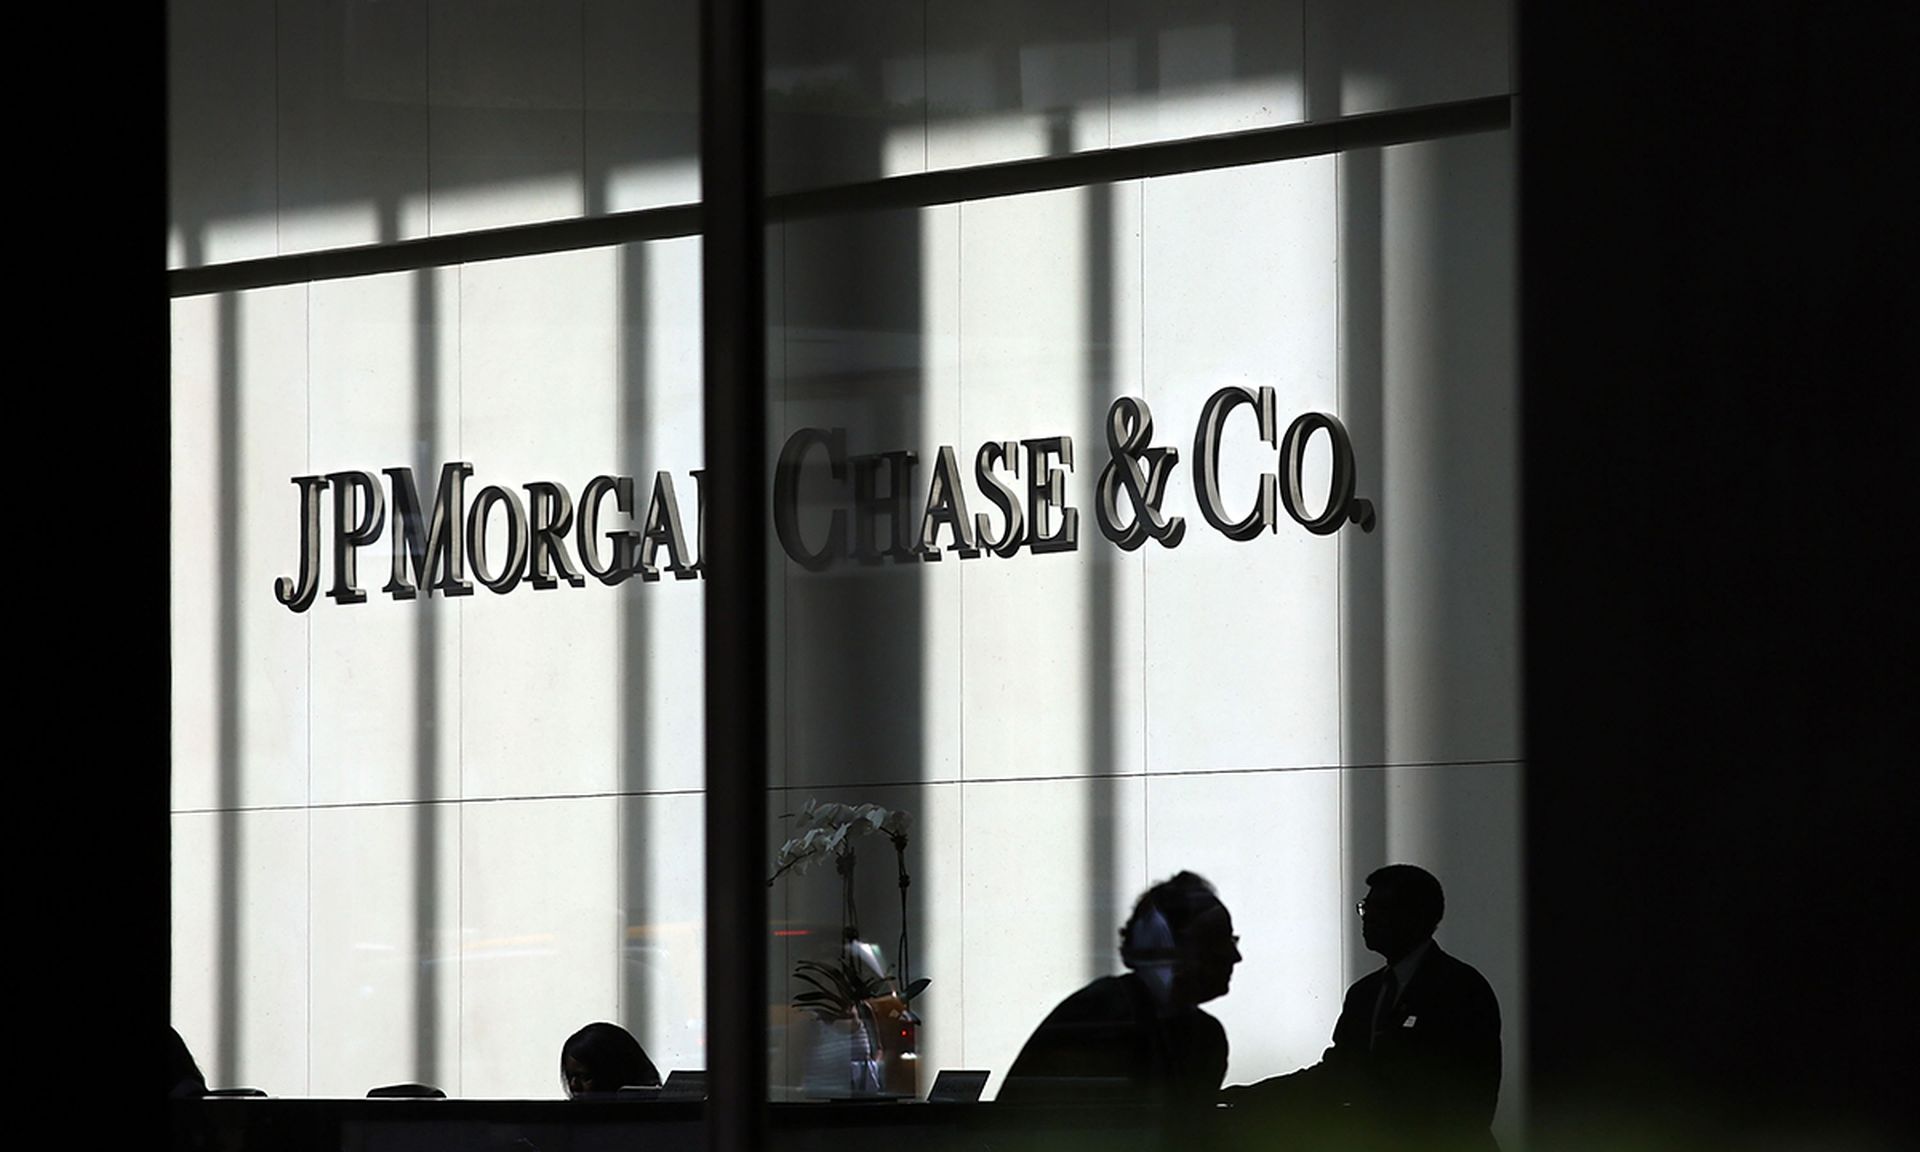 NEW YORK, NY &#8211; OCTOBER 02:  People pass a sign for JPMorgan Chase &amp; Co. at it&#8217;s headquarters in Manhattan on October 2, 2012 in New York City. New York Attorney General Eric Schneiderman has filed a civil lawsuit against JPMorgan Chase alleging widespread fraud in the way that mortgages were packaged and sold to investors in the day...